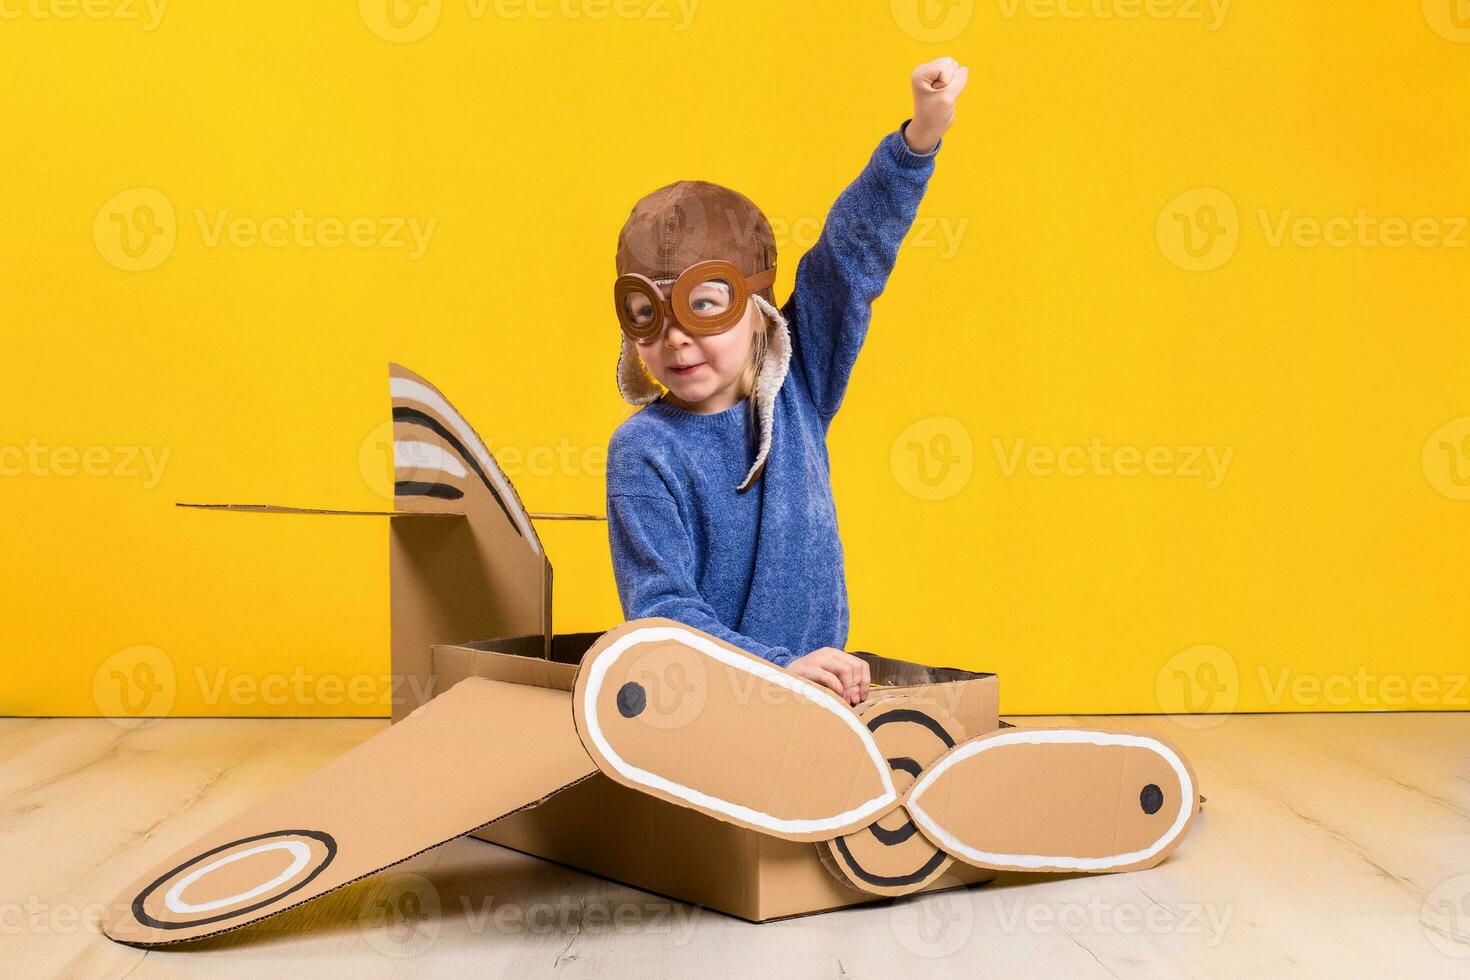 Little dreamer girl playing with a cardboard airplane. Childhood. Fantasy, imagination. photo